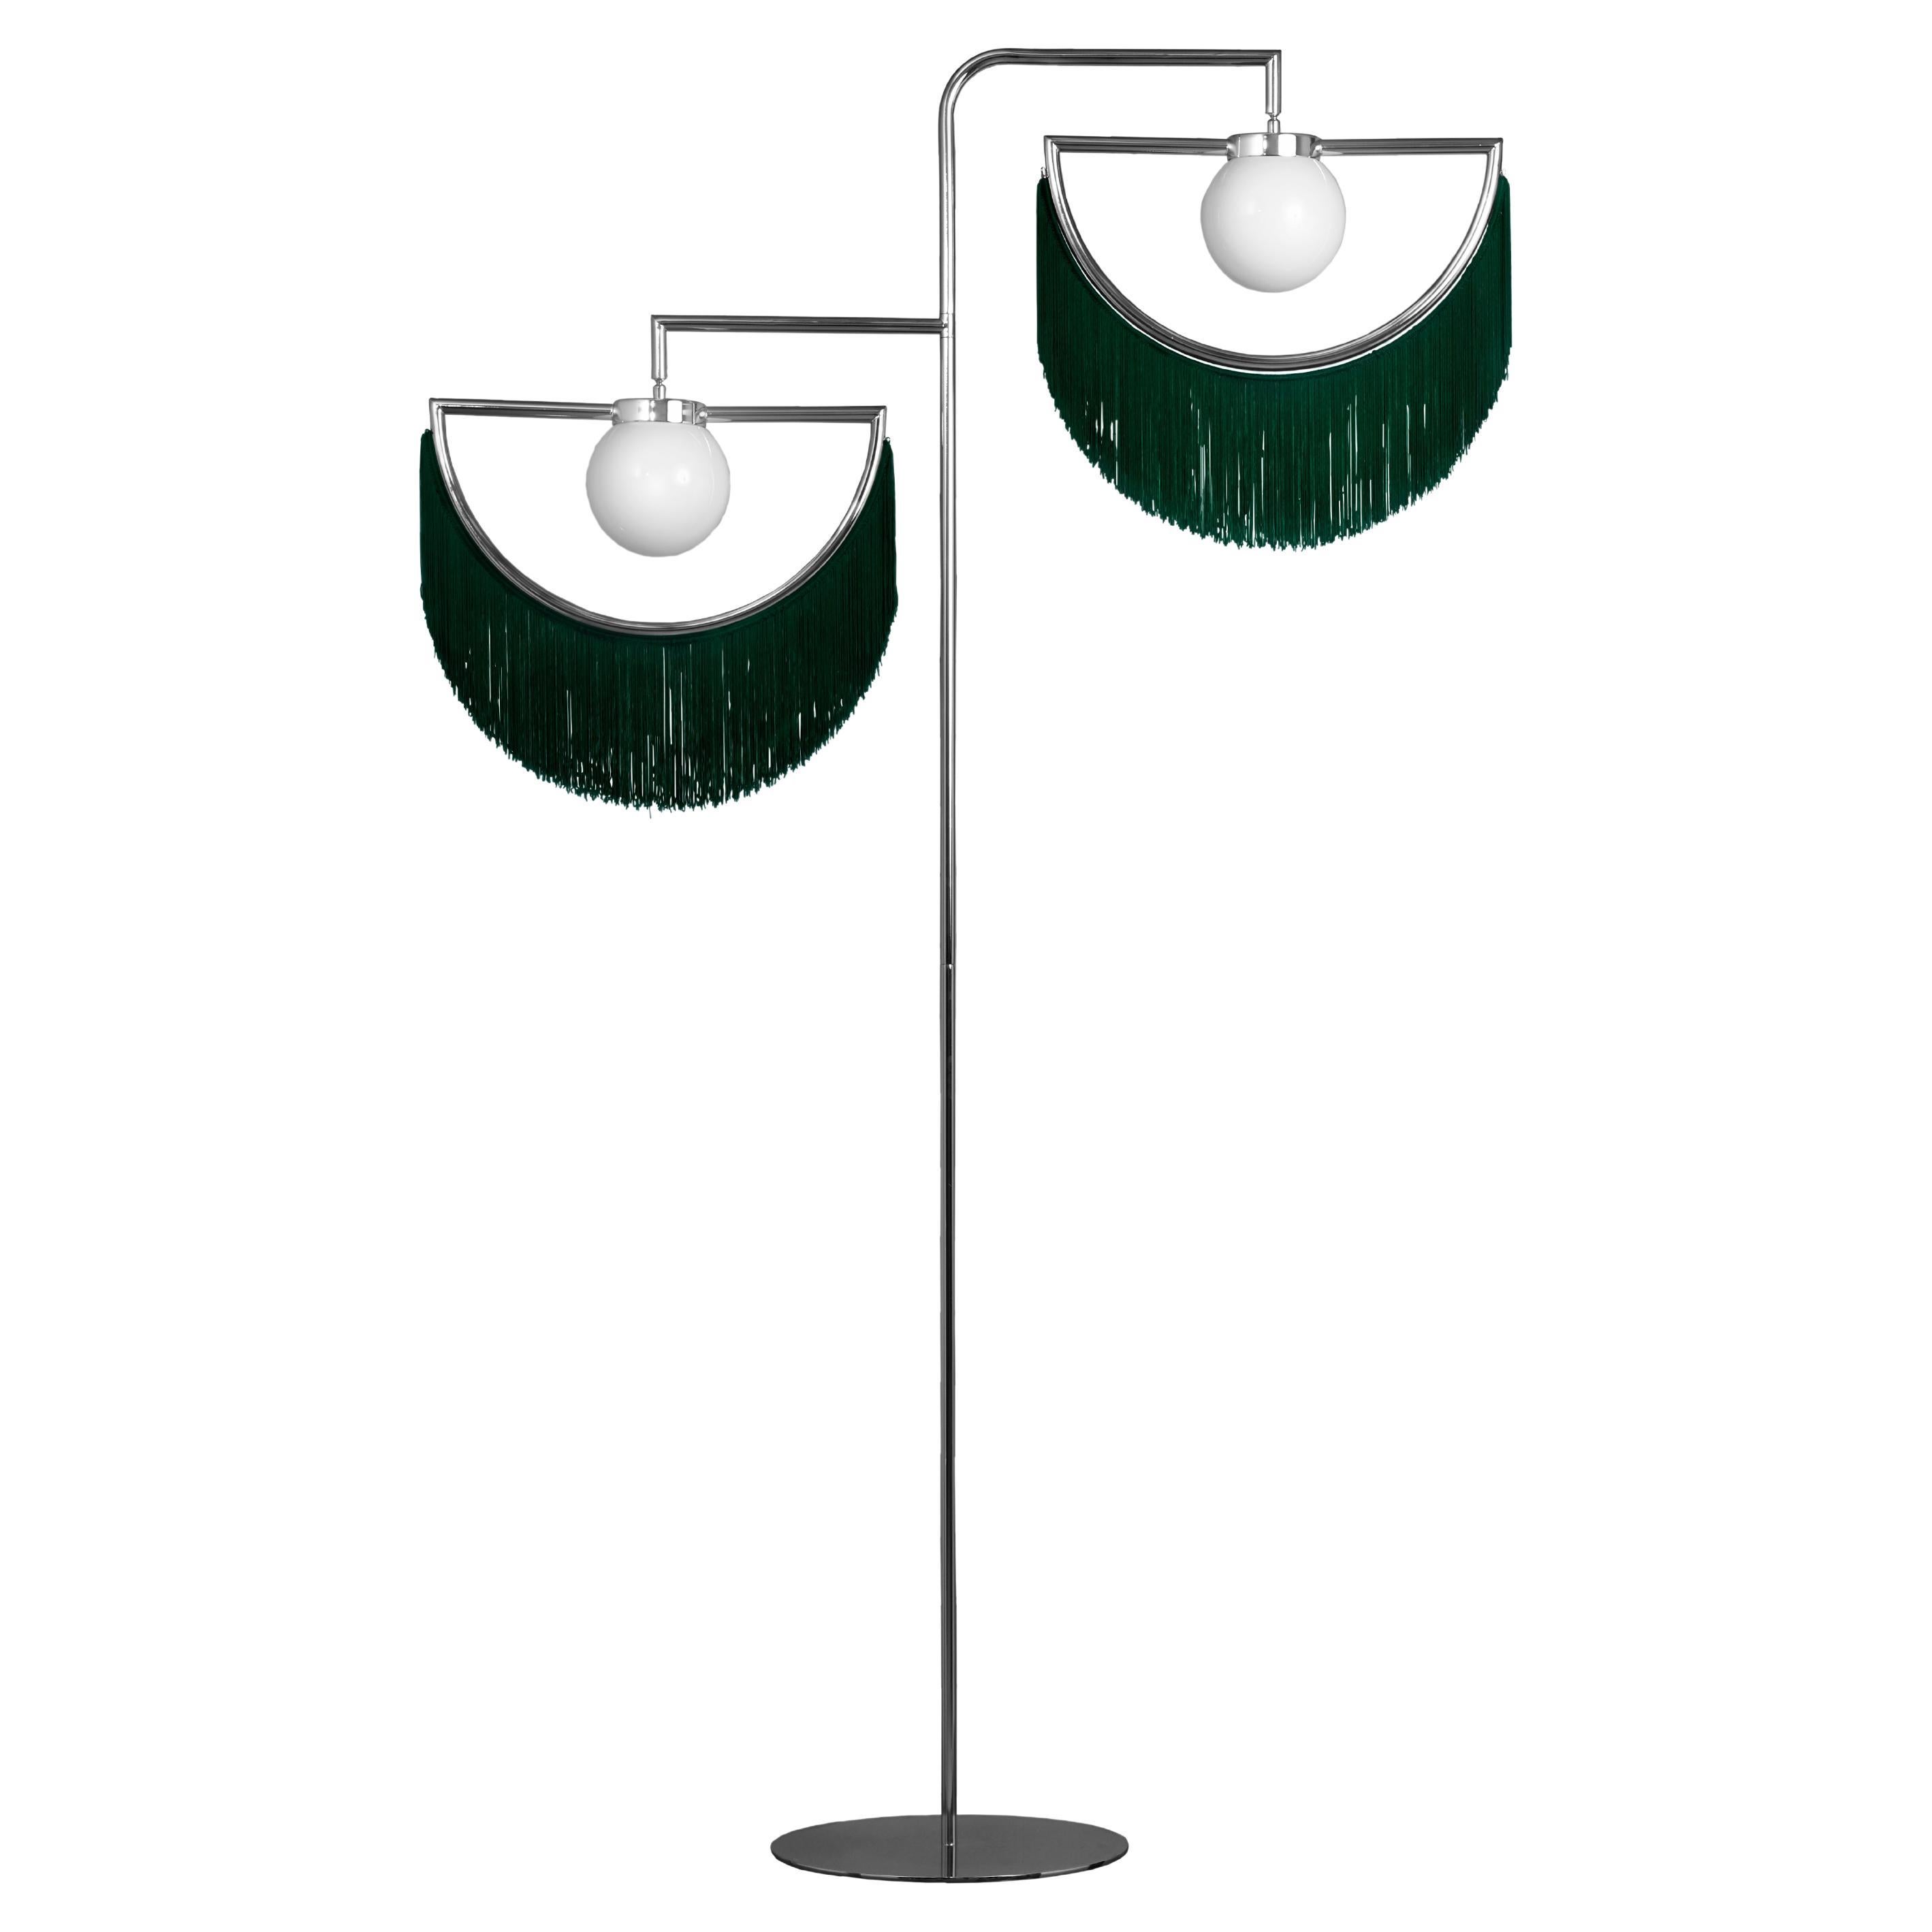 Wink Standing Lamp by Houtique, Green